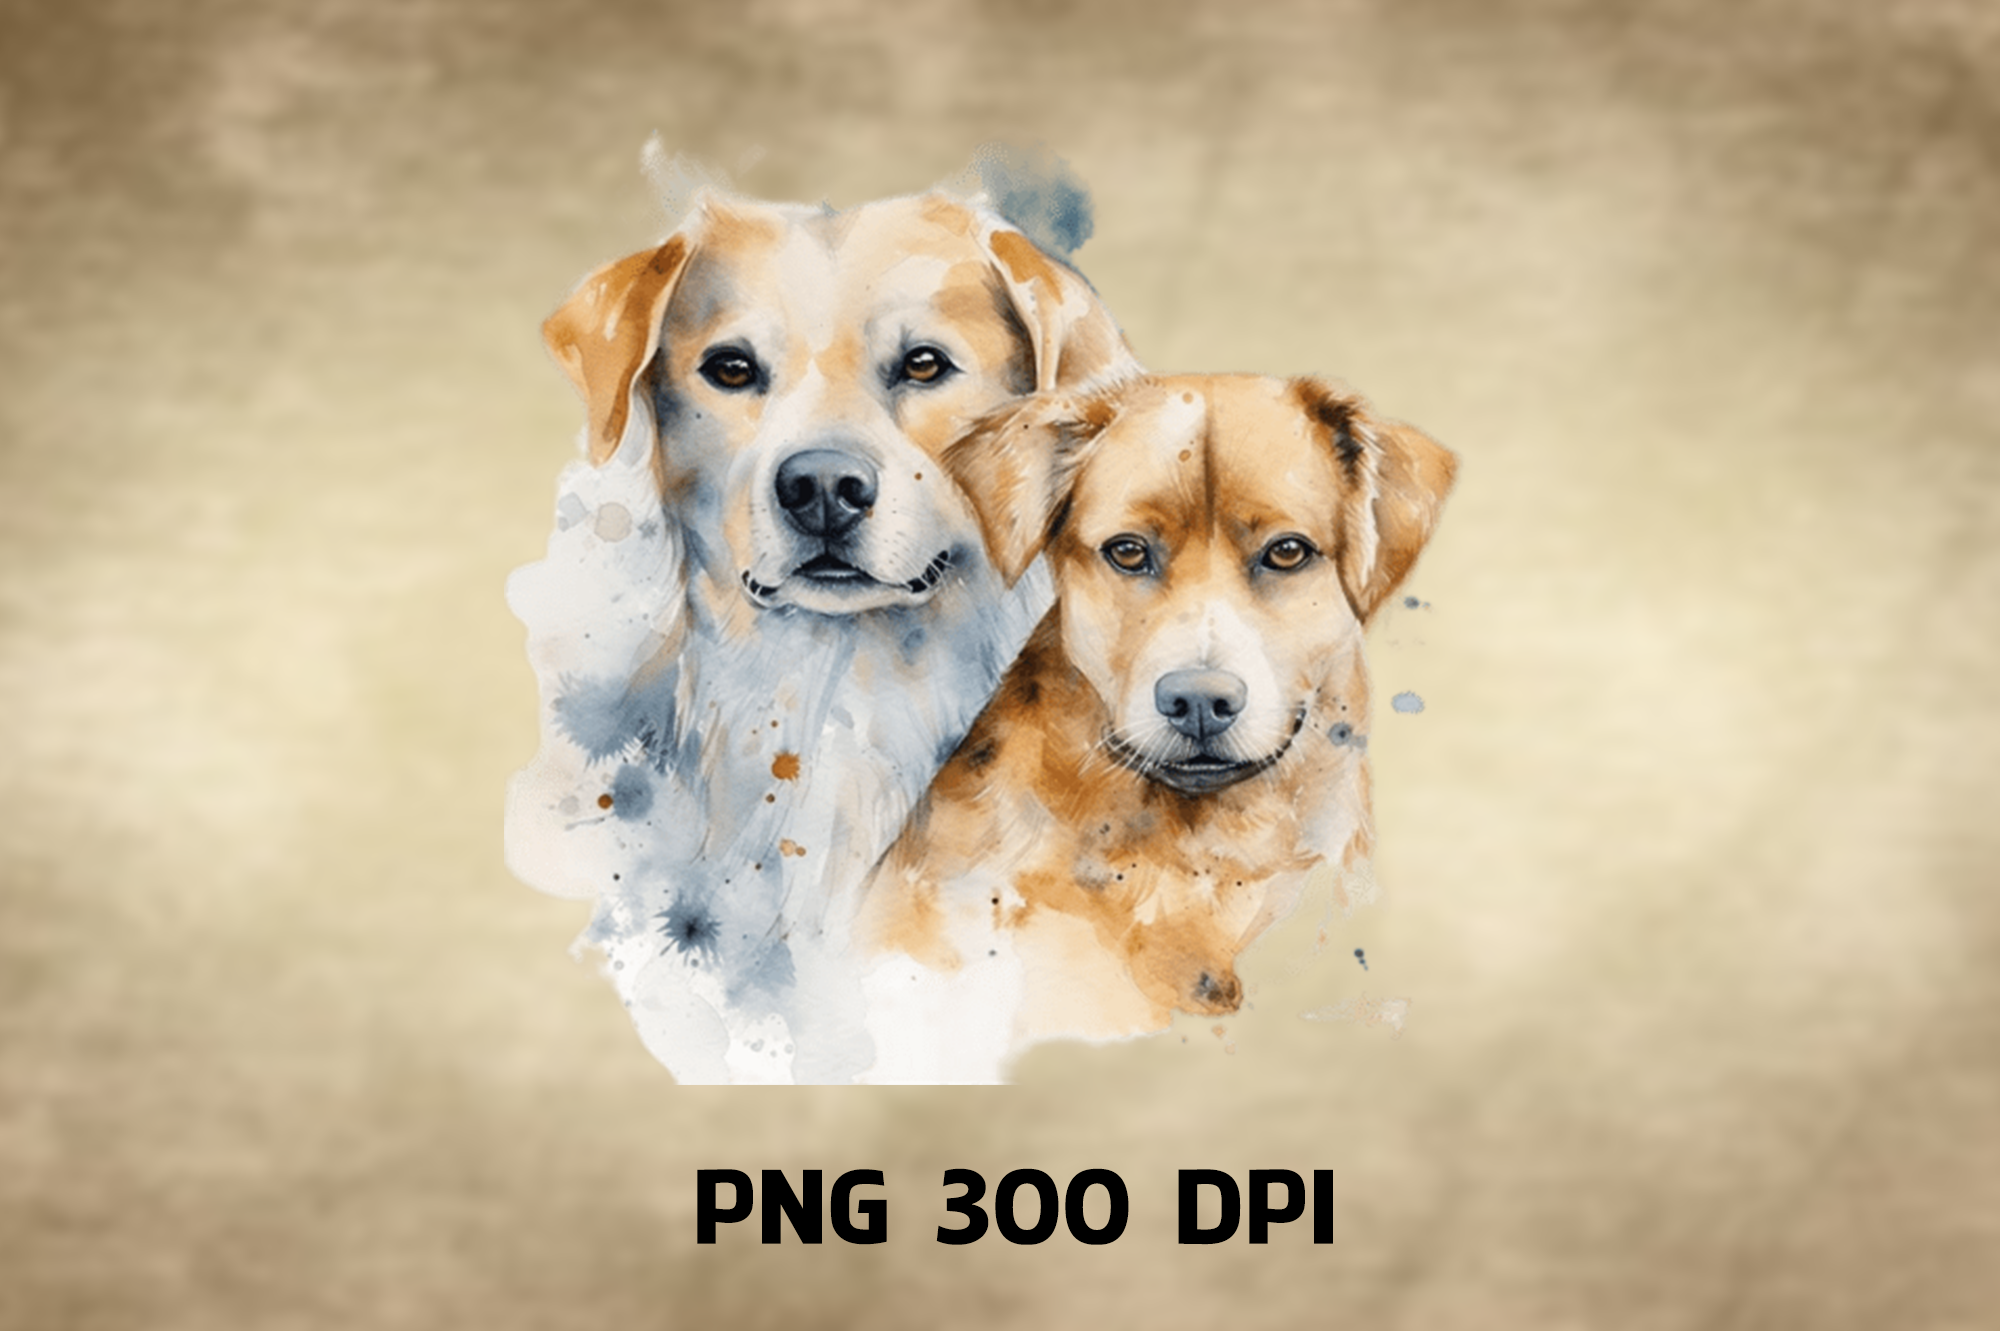 Dog Warcolor Sublimation Clipart Graphic by Stanfield Design · Creative ...